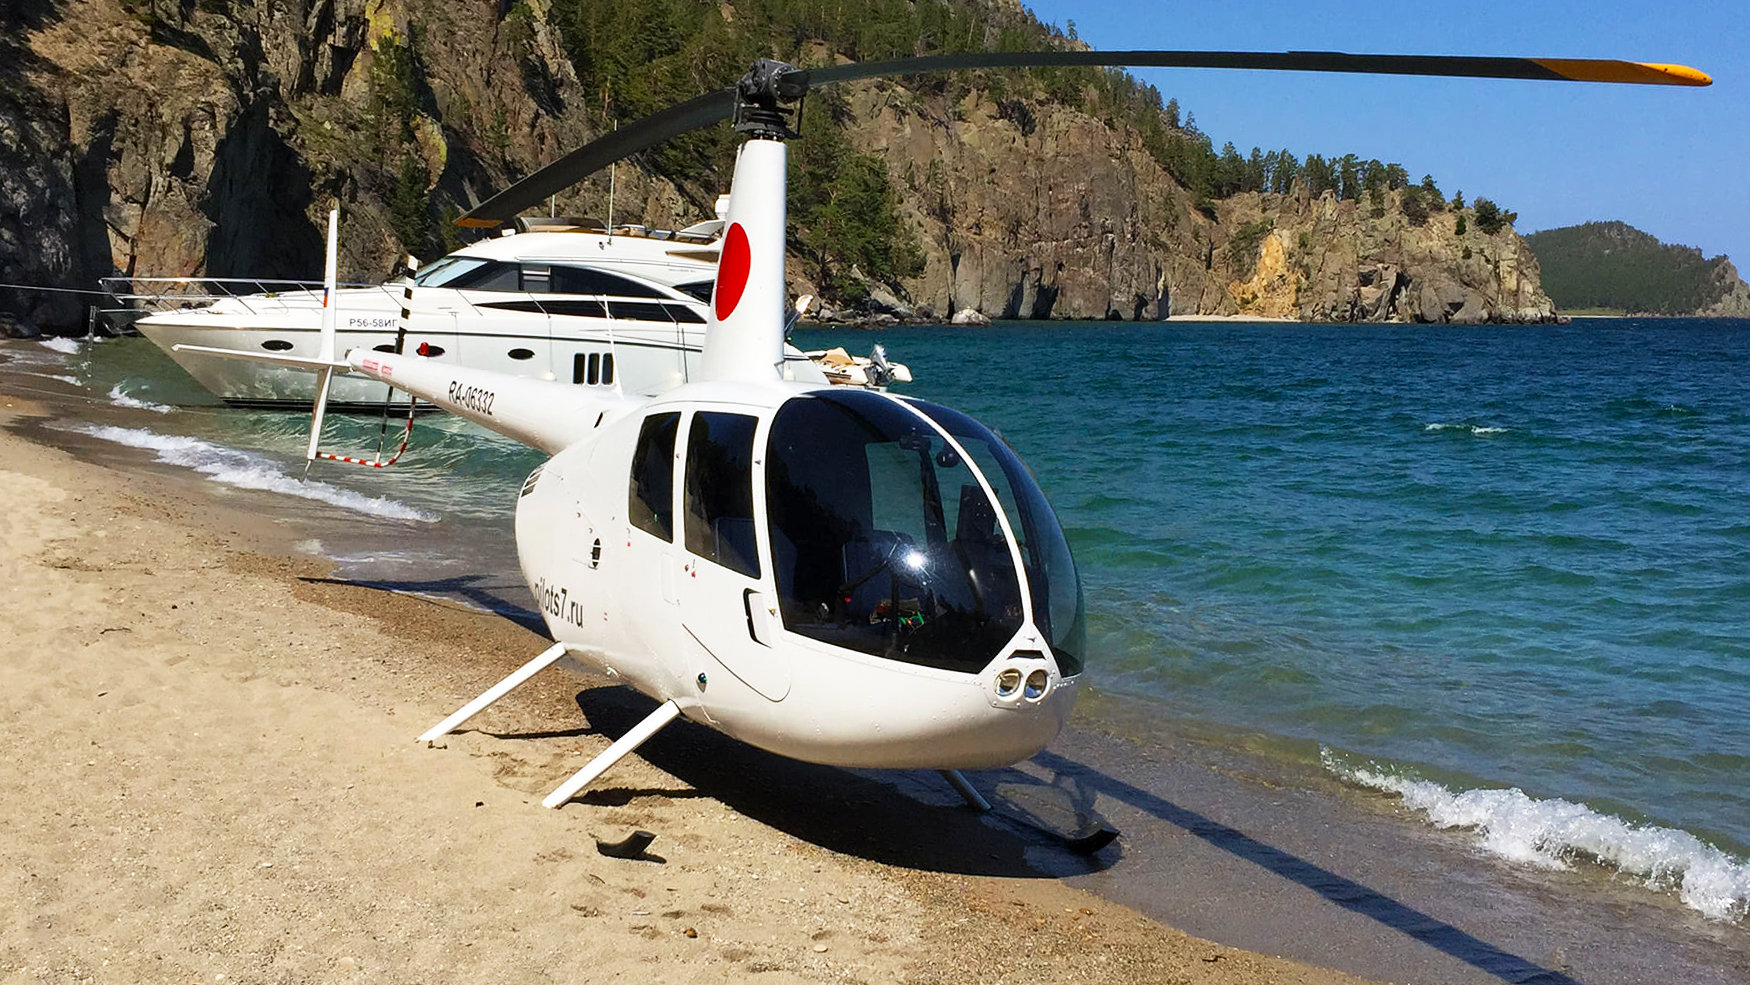 Helicopter stay "The Baikal tour in 8 days"